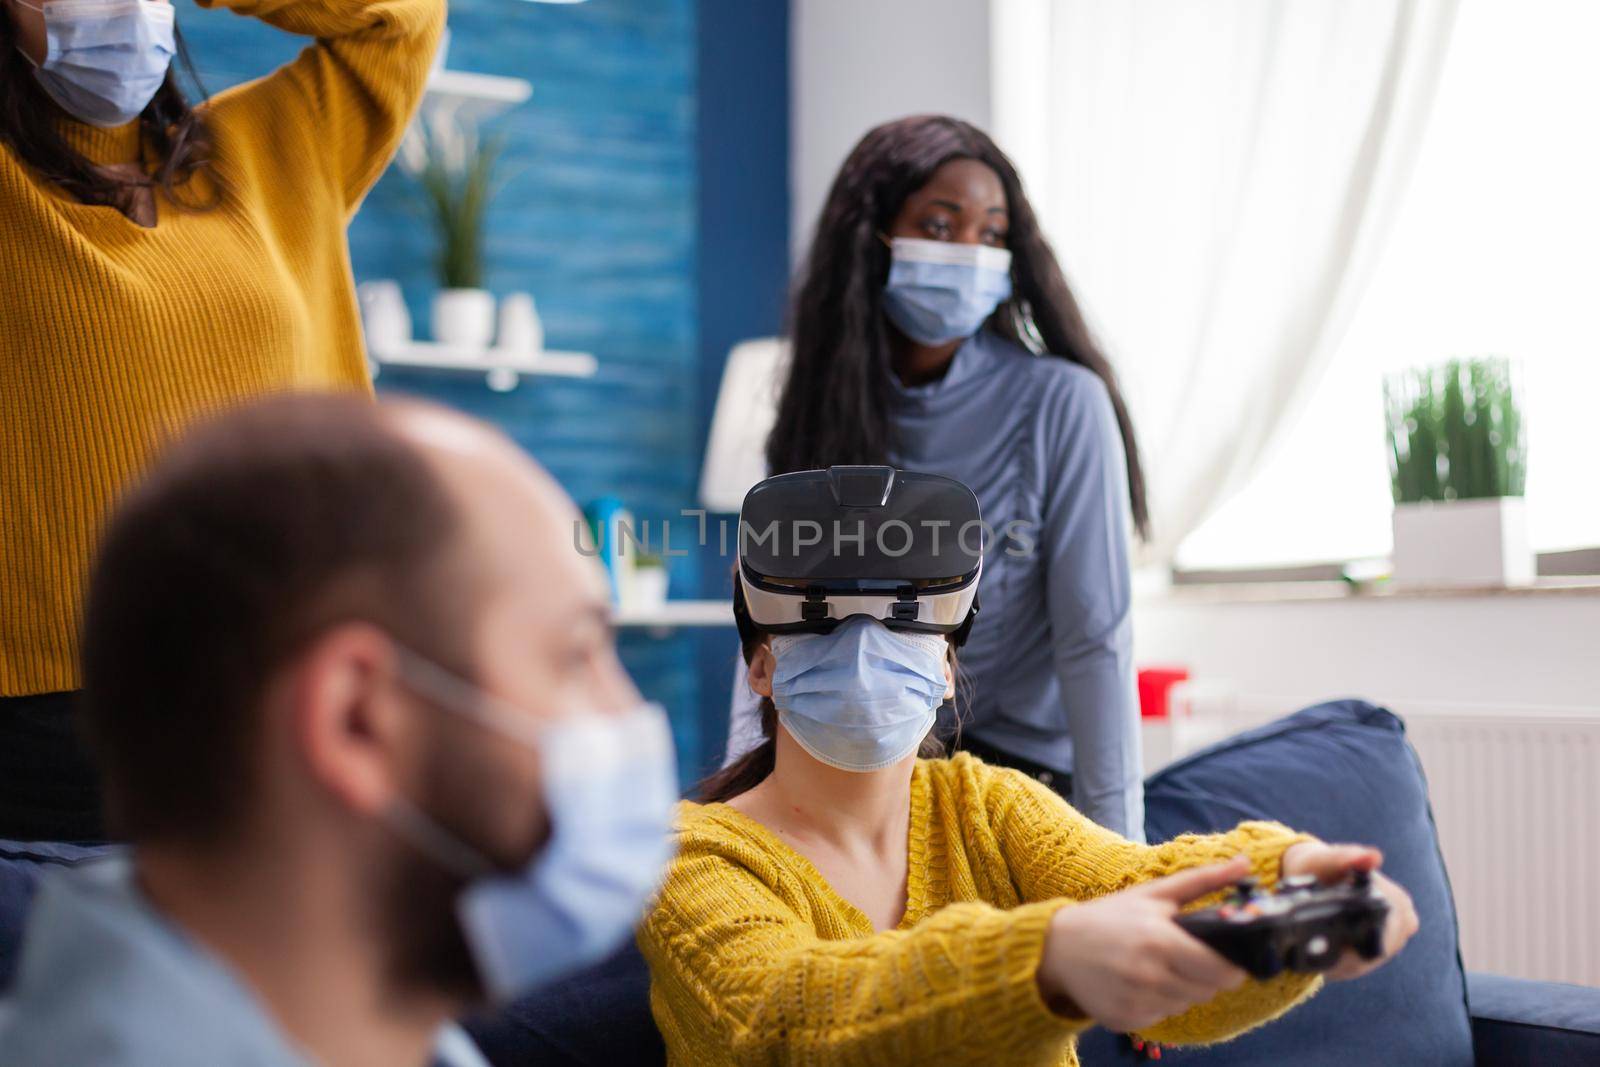 Woman experiencing virtual reality playing video games wearing vr headset during social pandemic with friends in home living room respecting social distancing having face mask not to spread the virus.